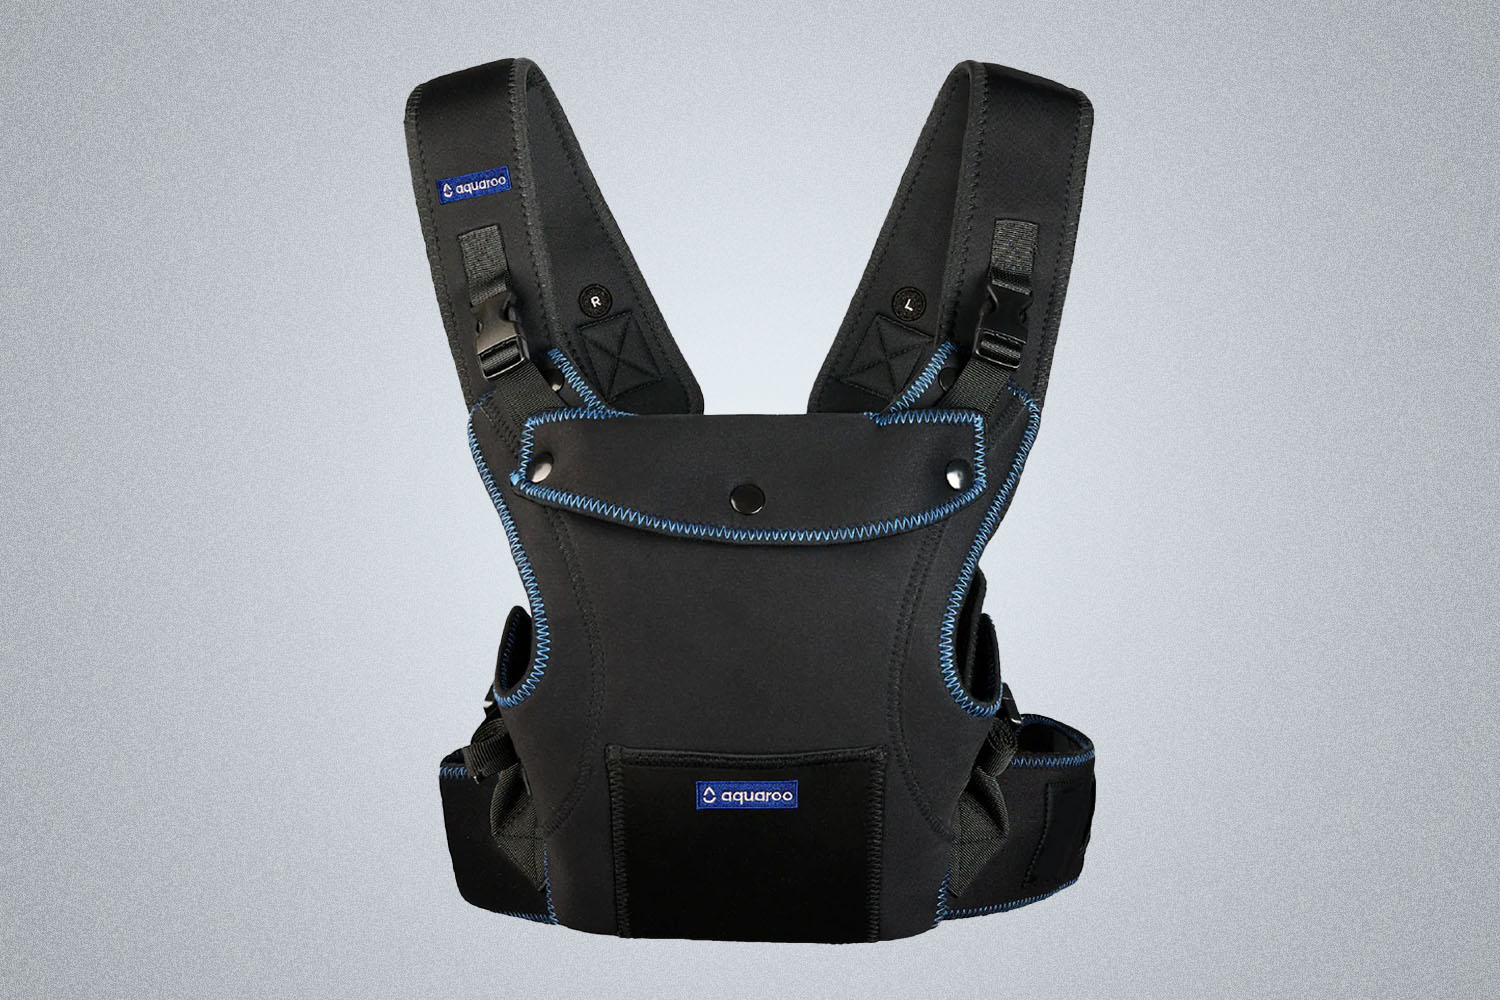 a black harness carrier from Aquaroo on a grey backround